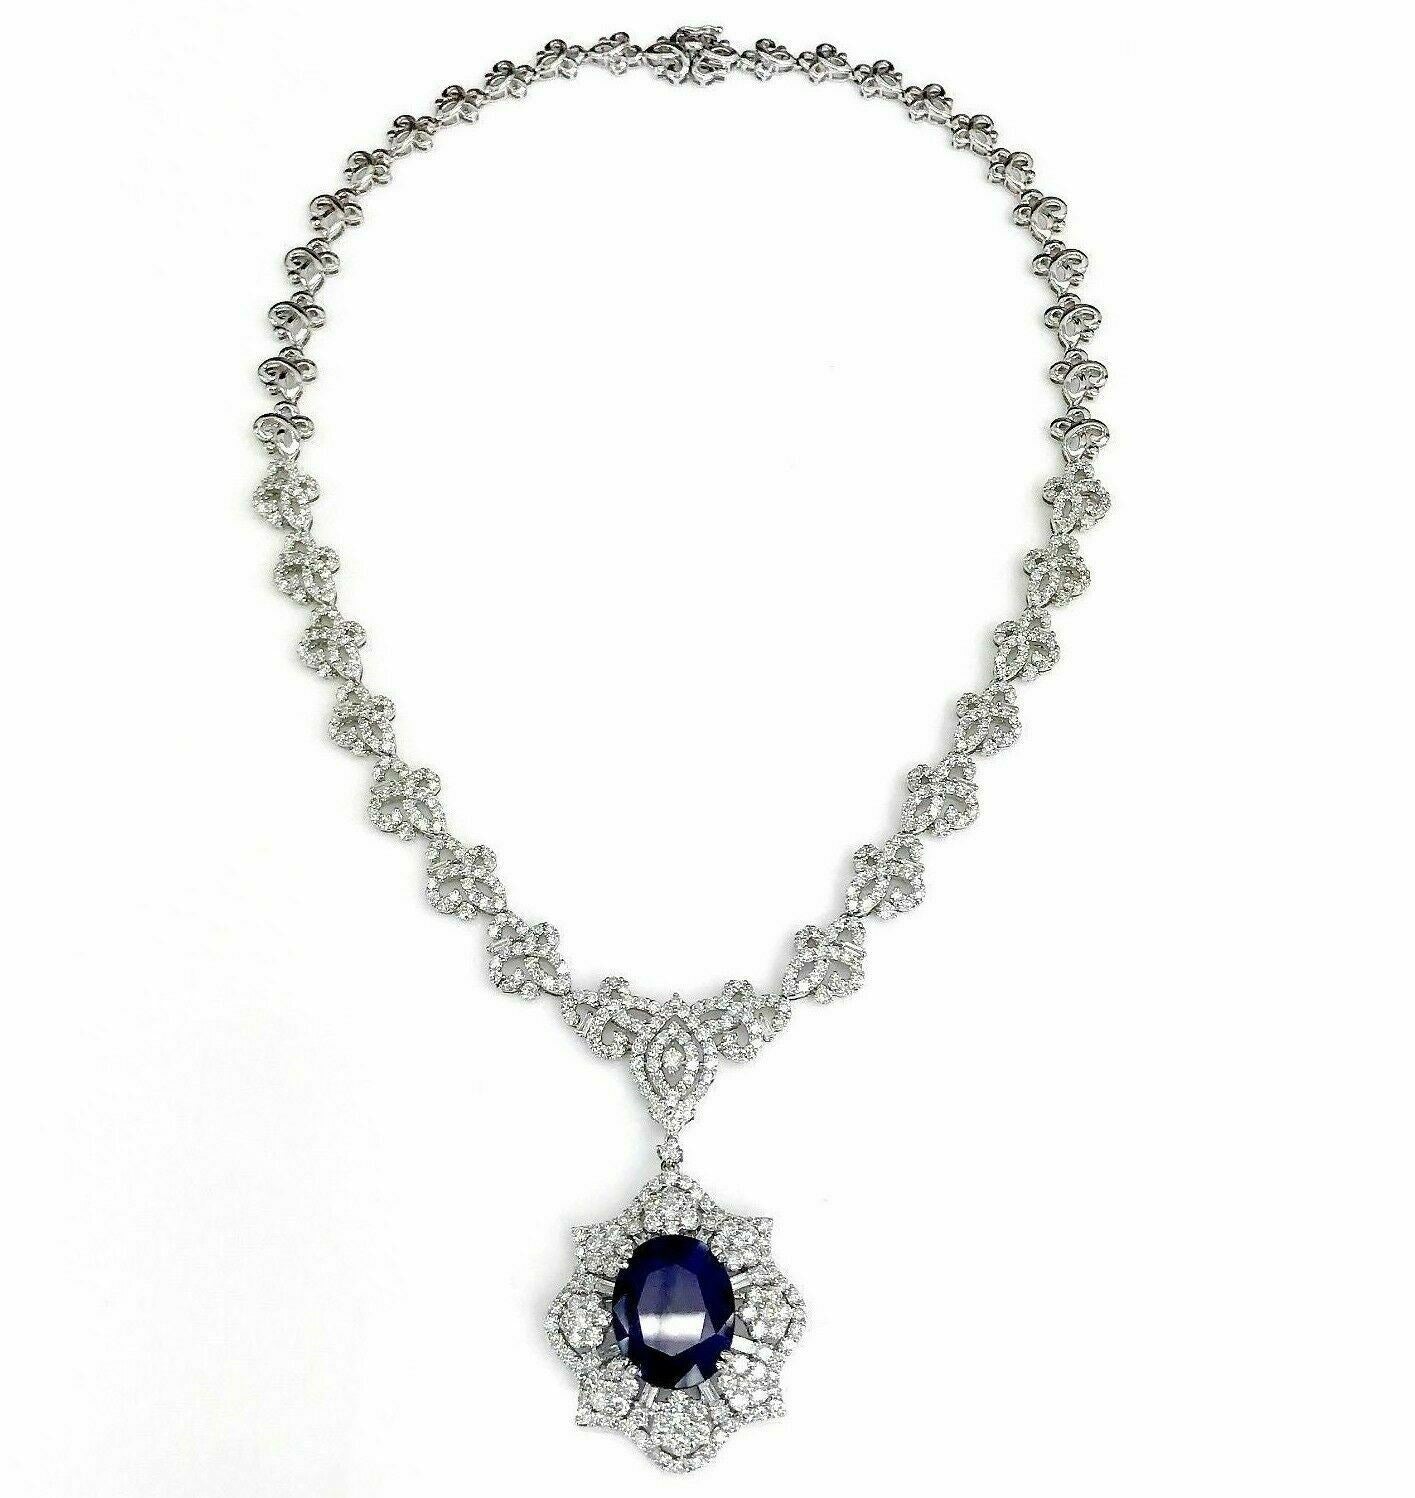 24.05 Carats t.w. Diamond and Blue Sapphire Dinner Necklace 18K Gold 38 Grams